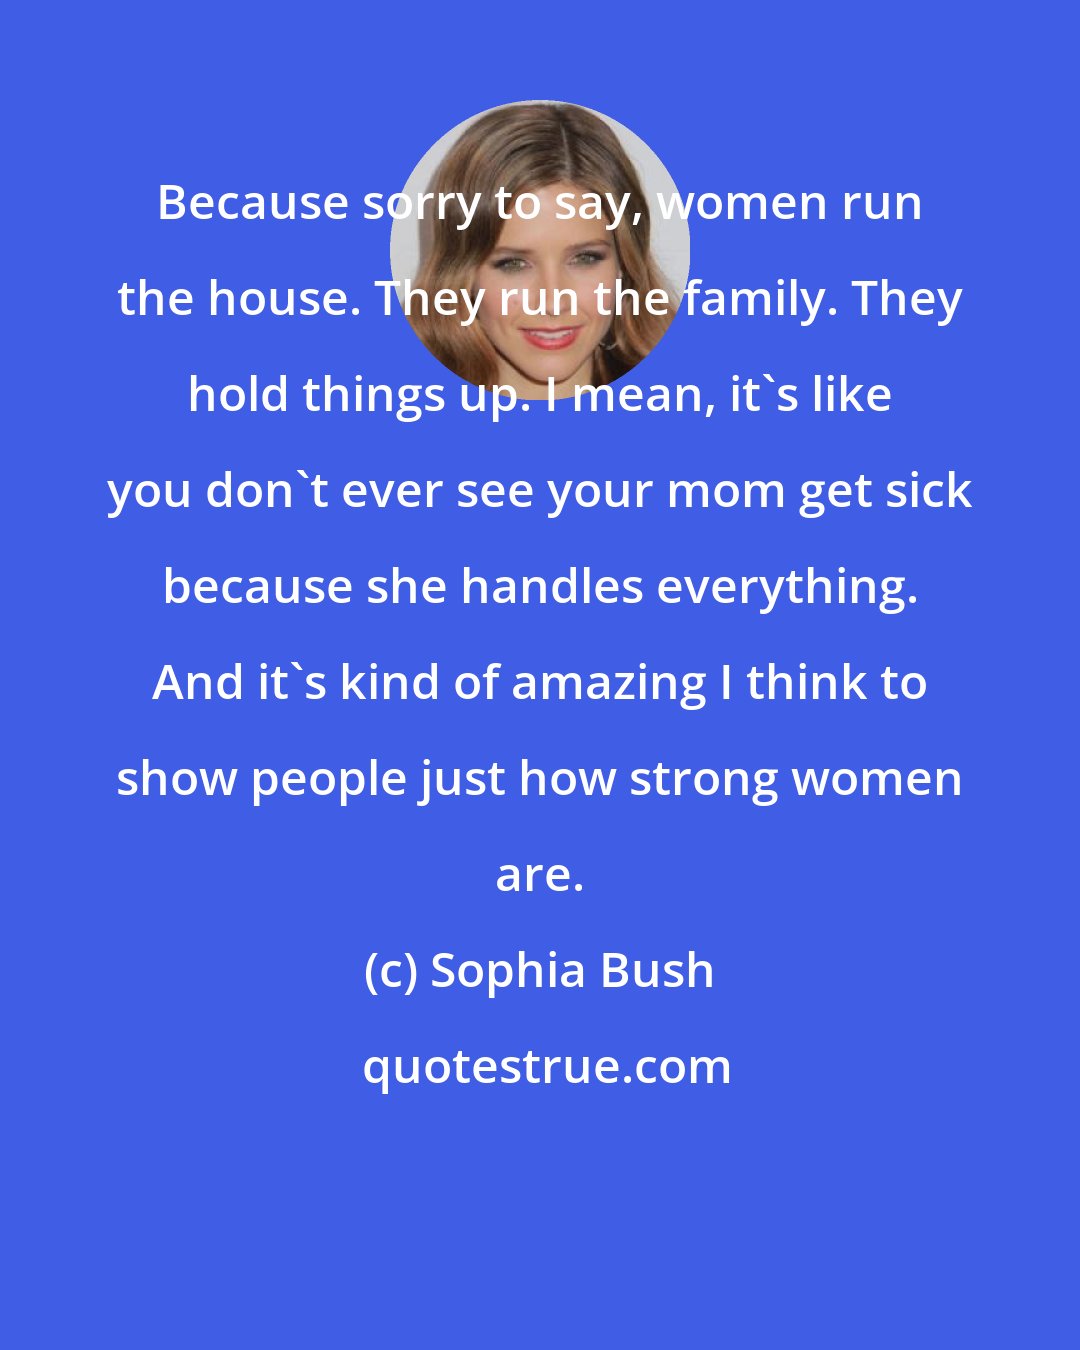 Sophia Bush: Because sorry to say, women run the house. They run the family. They hold things up. I mean, it's like you don't ever see your mom get sick because she handles everything. And it's kind of amazing I think to show people just how strong women are.